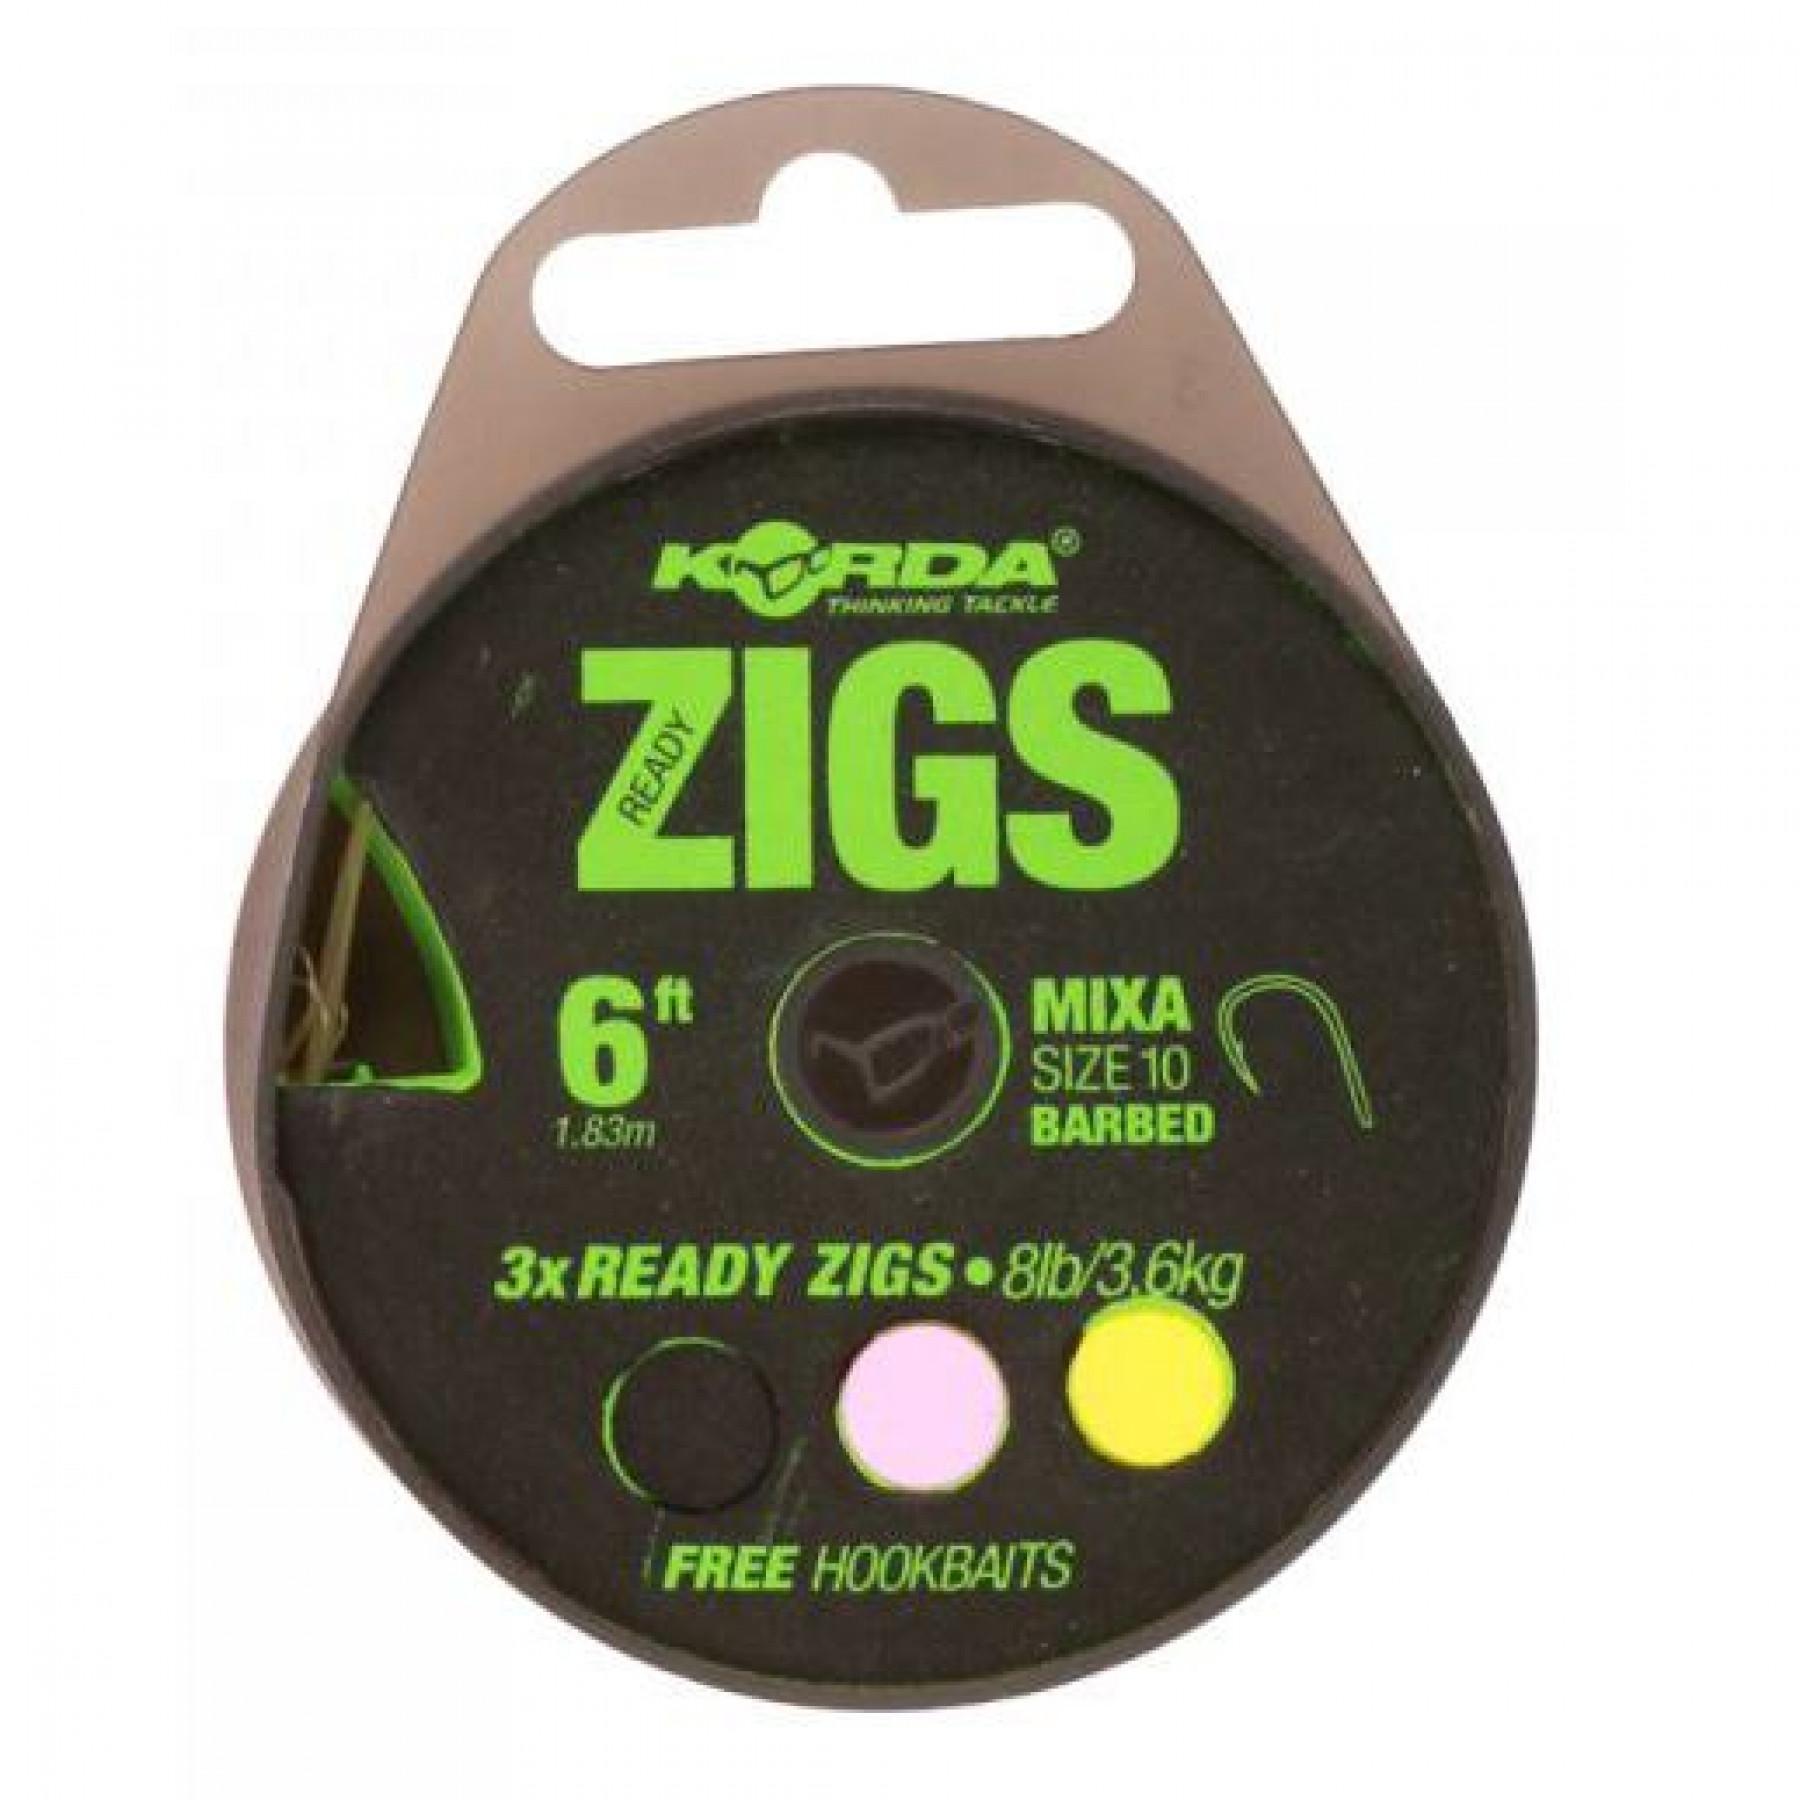 Korda Ready Zigs Barbless without waist pin size 10, 8lb